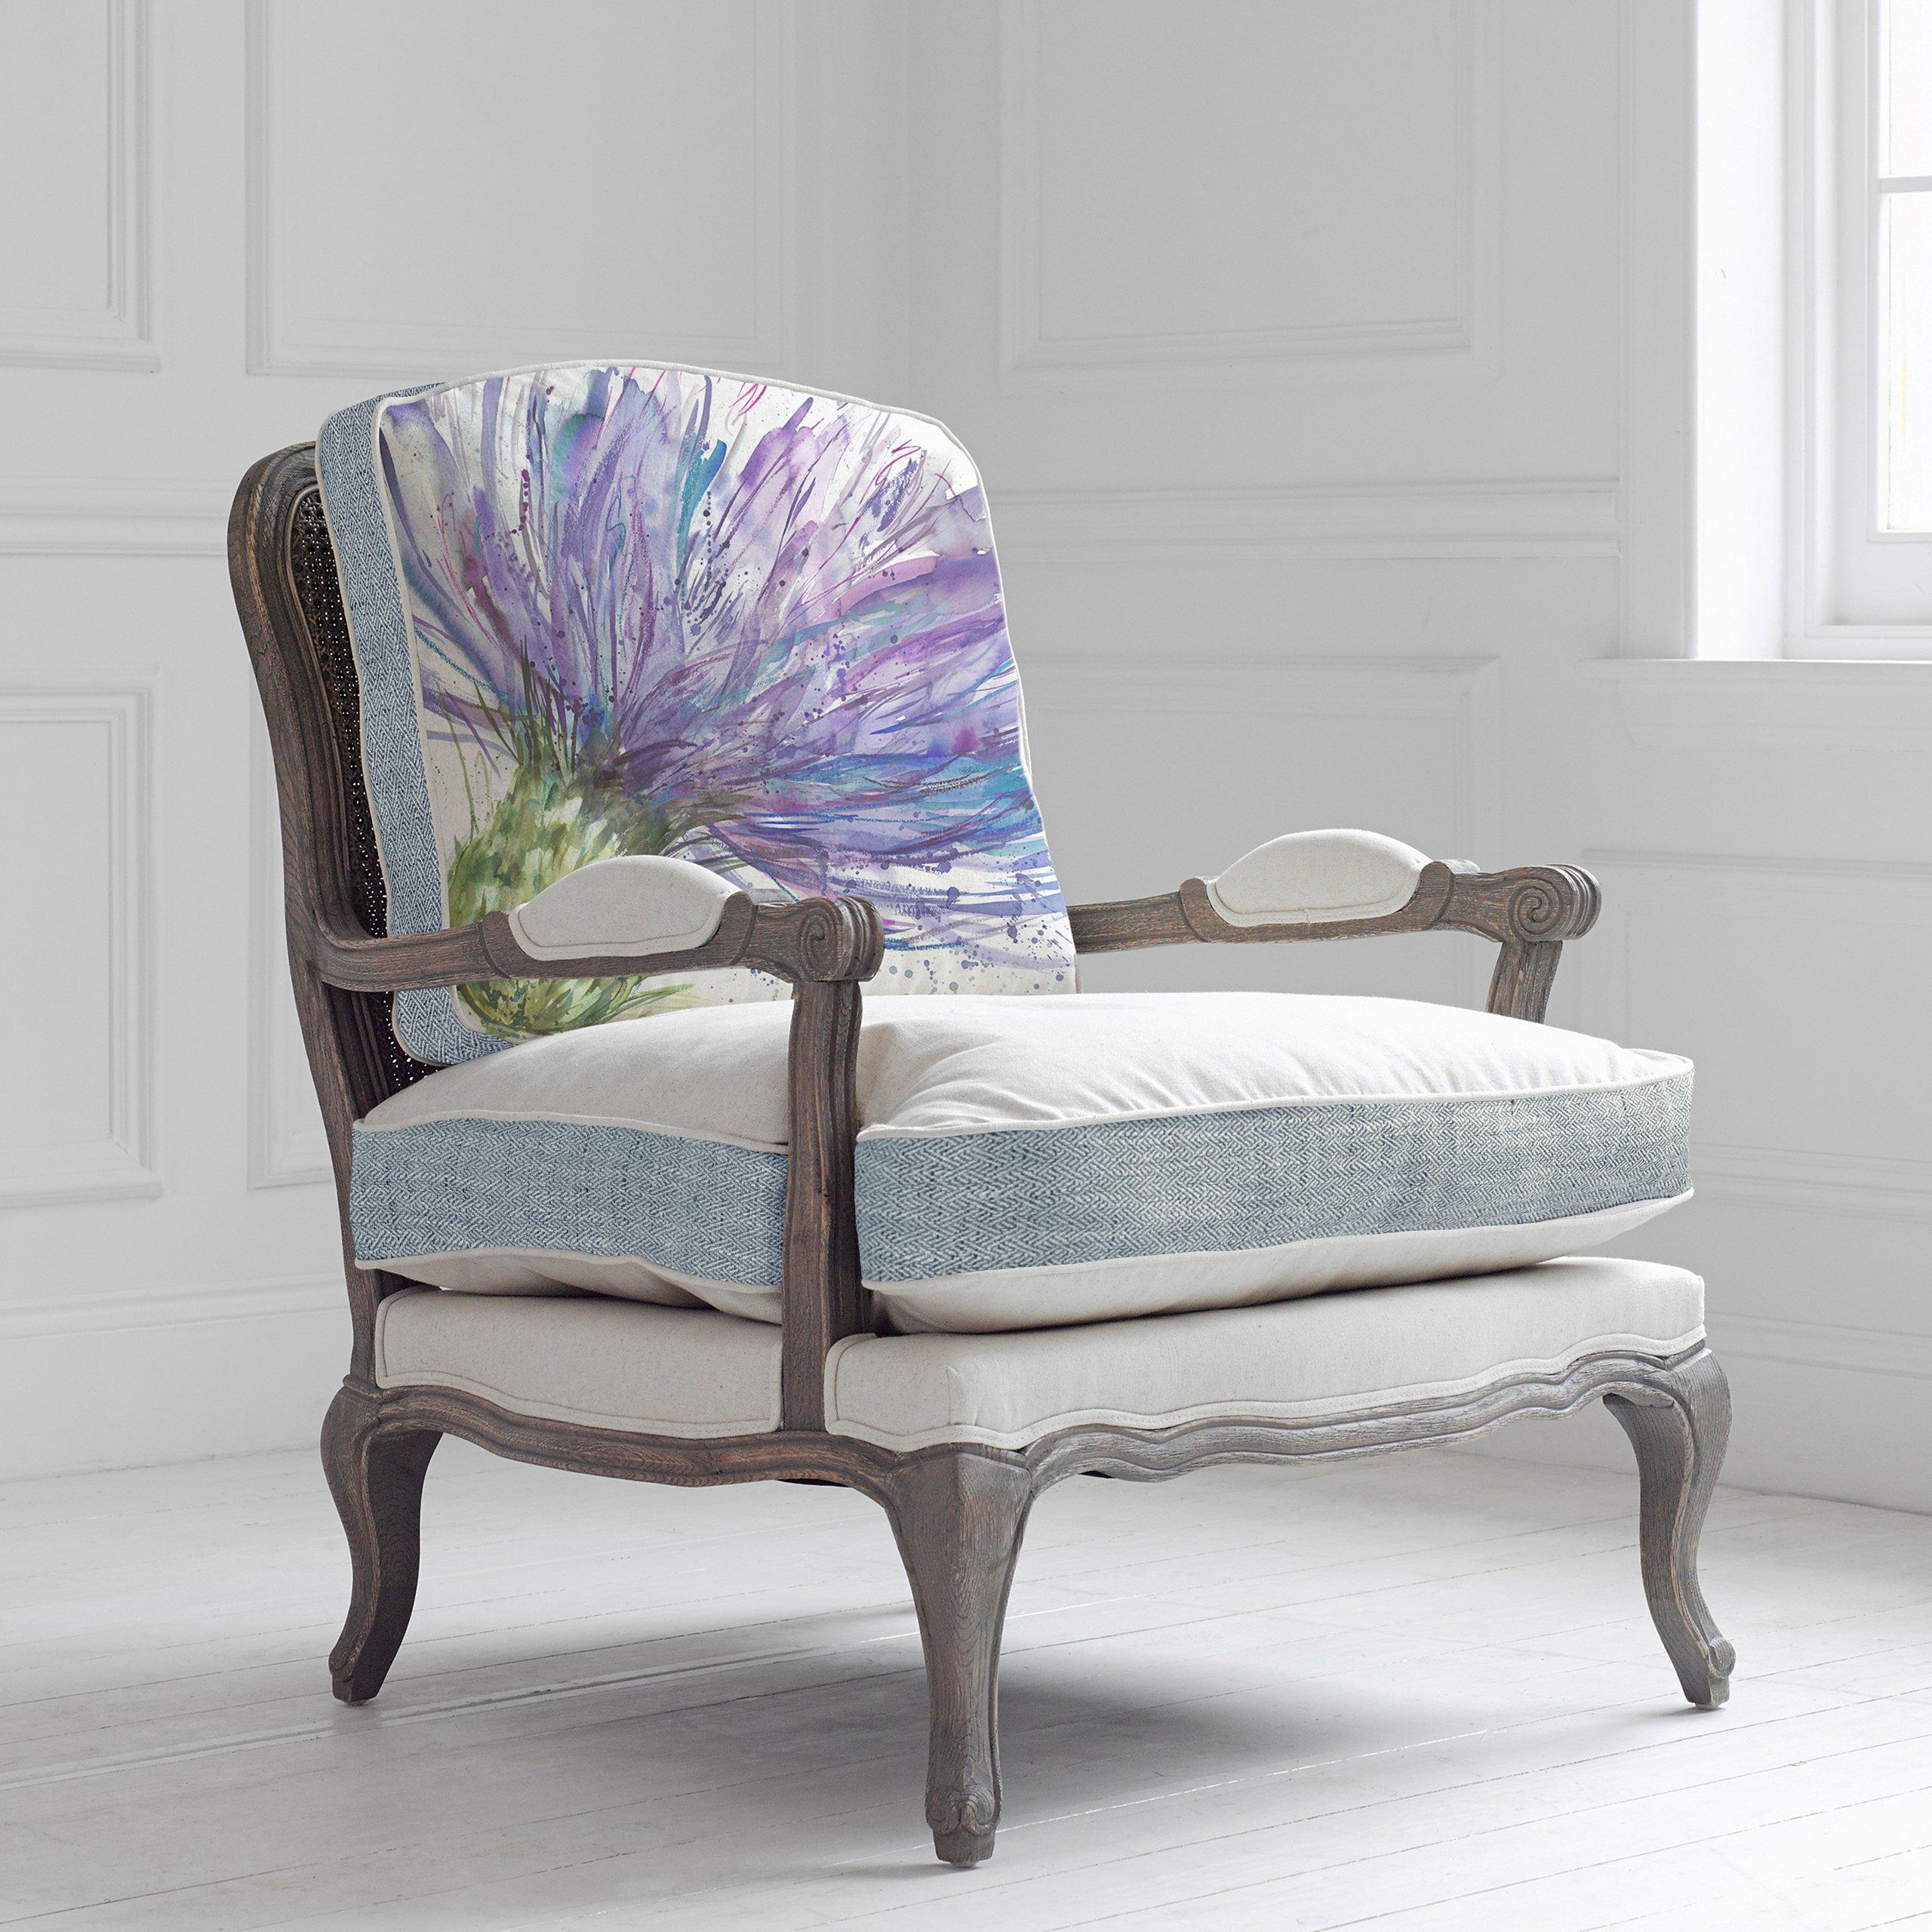 Florence Expressive Thistle Glen Floral Chair